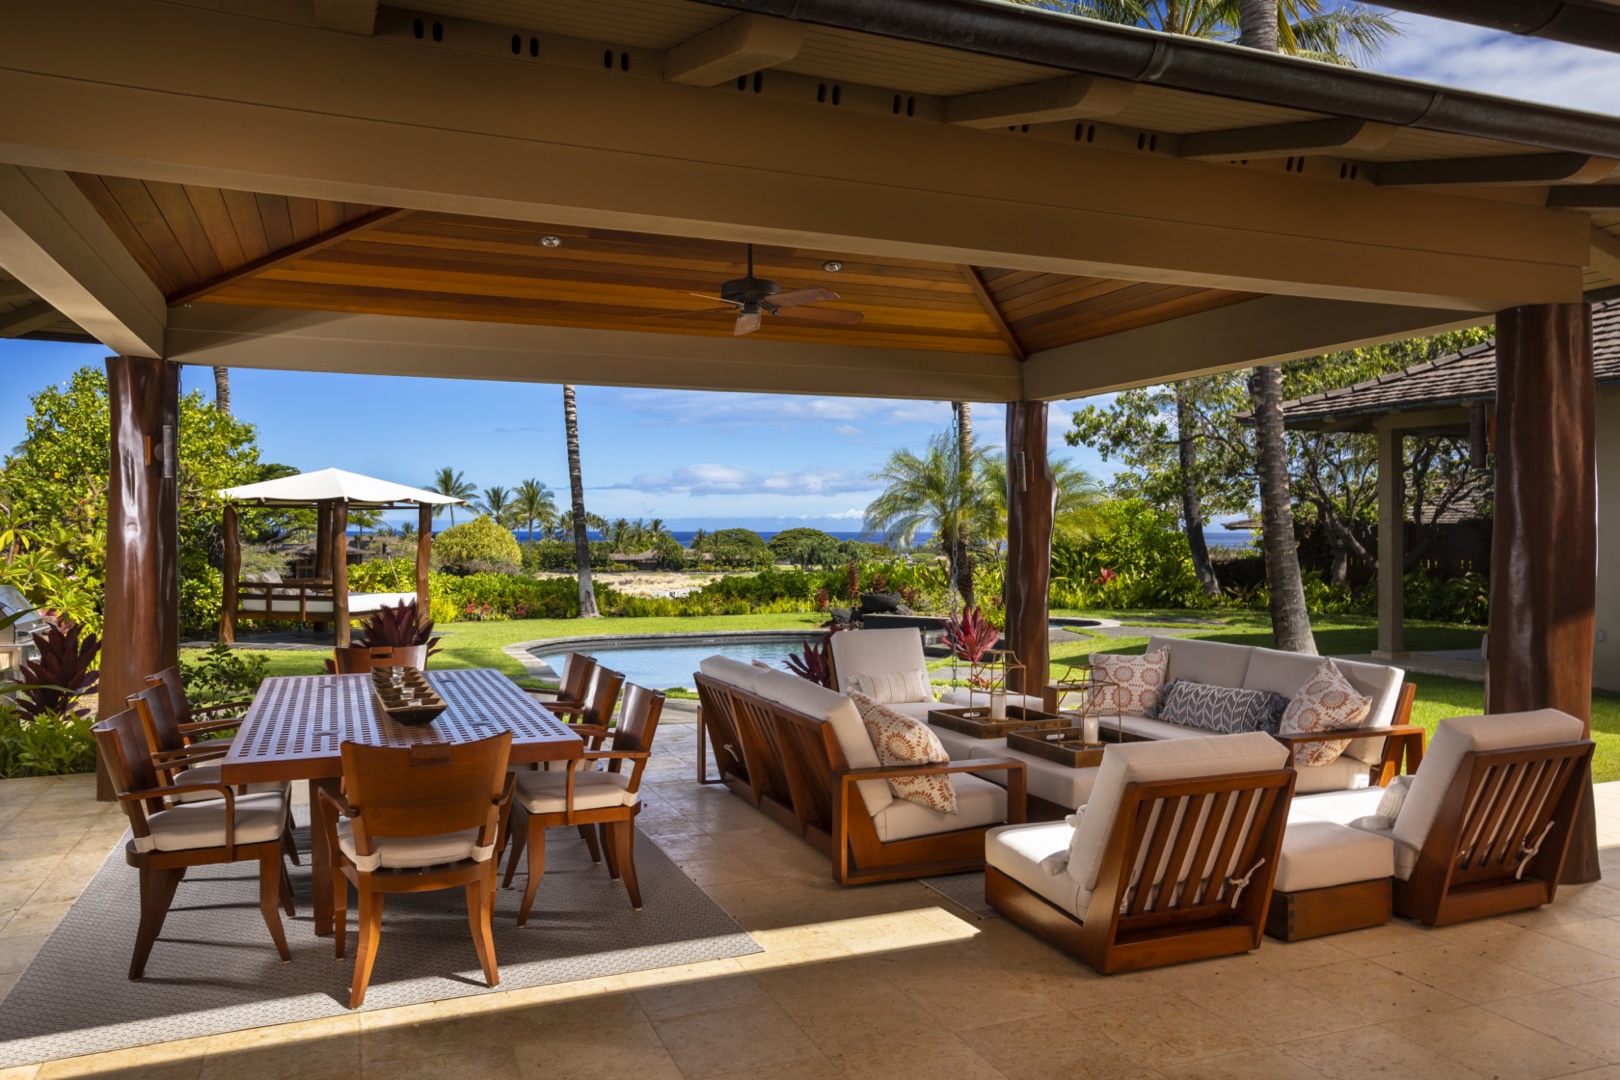 Kailua Kona Vacation Rentals, 4BD Kahikole Street (218) Estate Home at Four Seasons Resort at Hualalai - Stylish lanai lounge space, al fresco dining for 8 with ocean views & a nearby grilling station